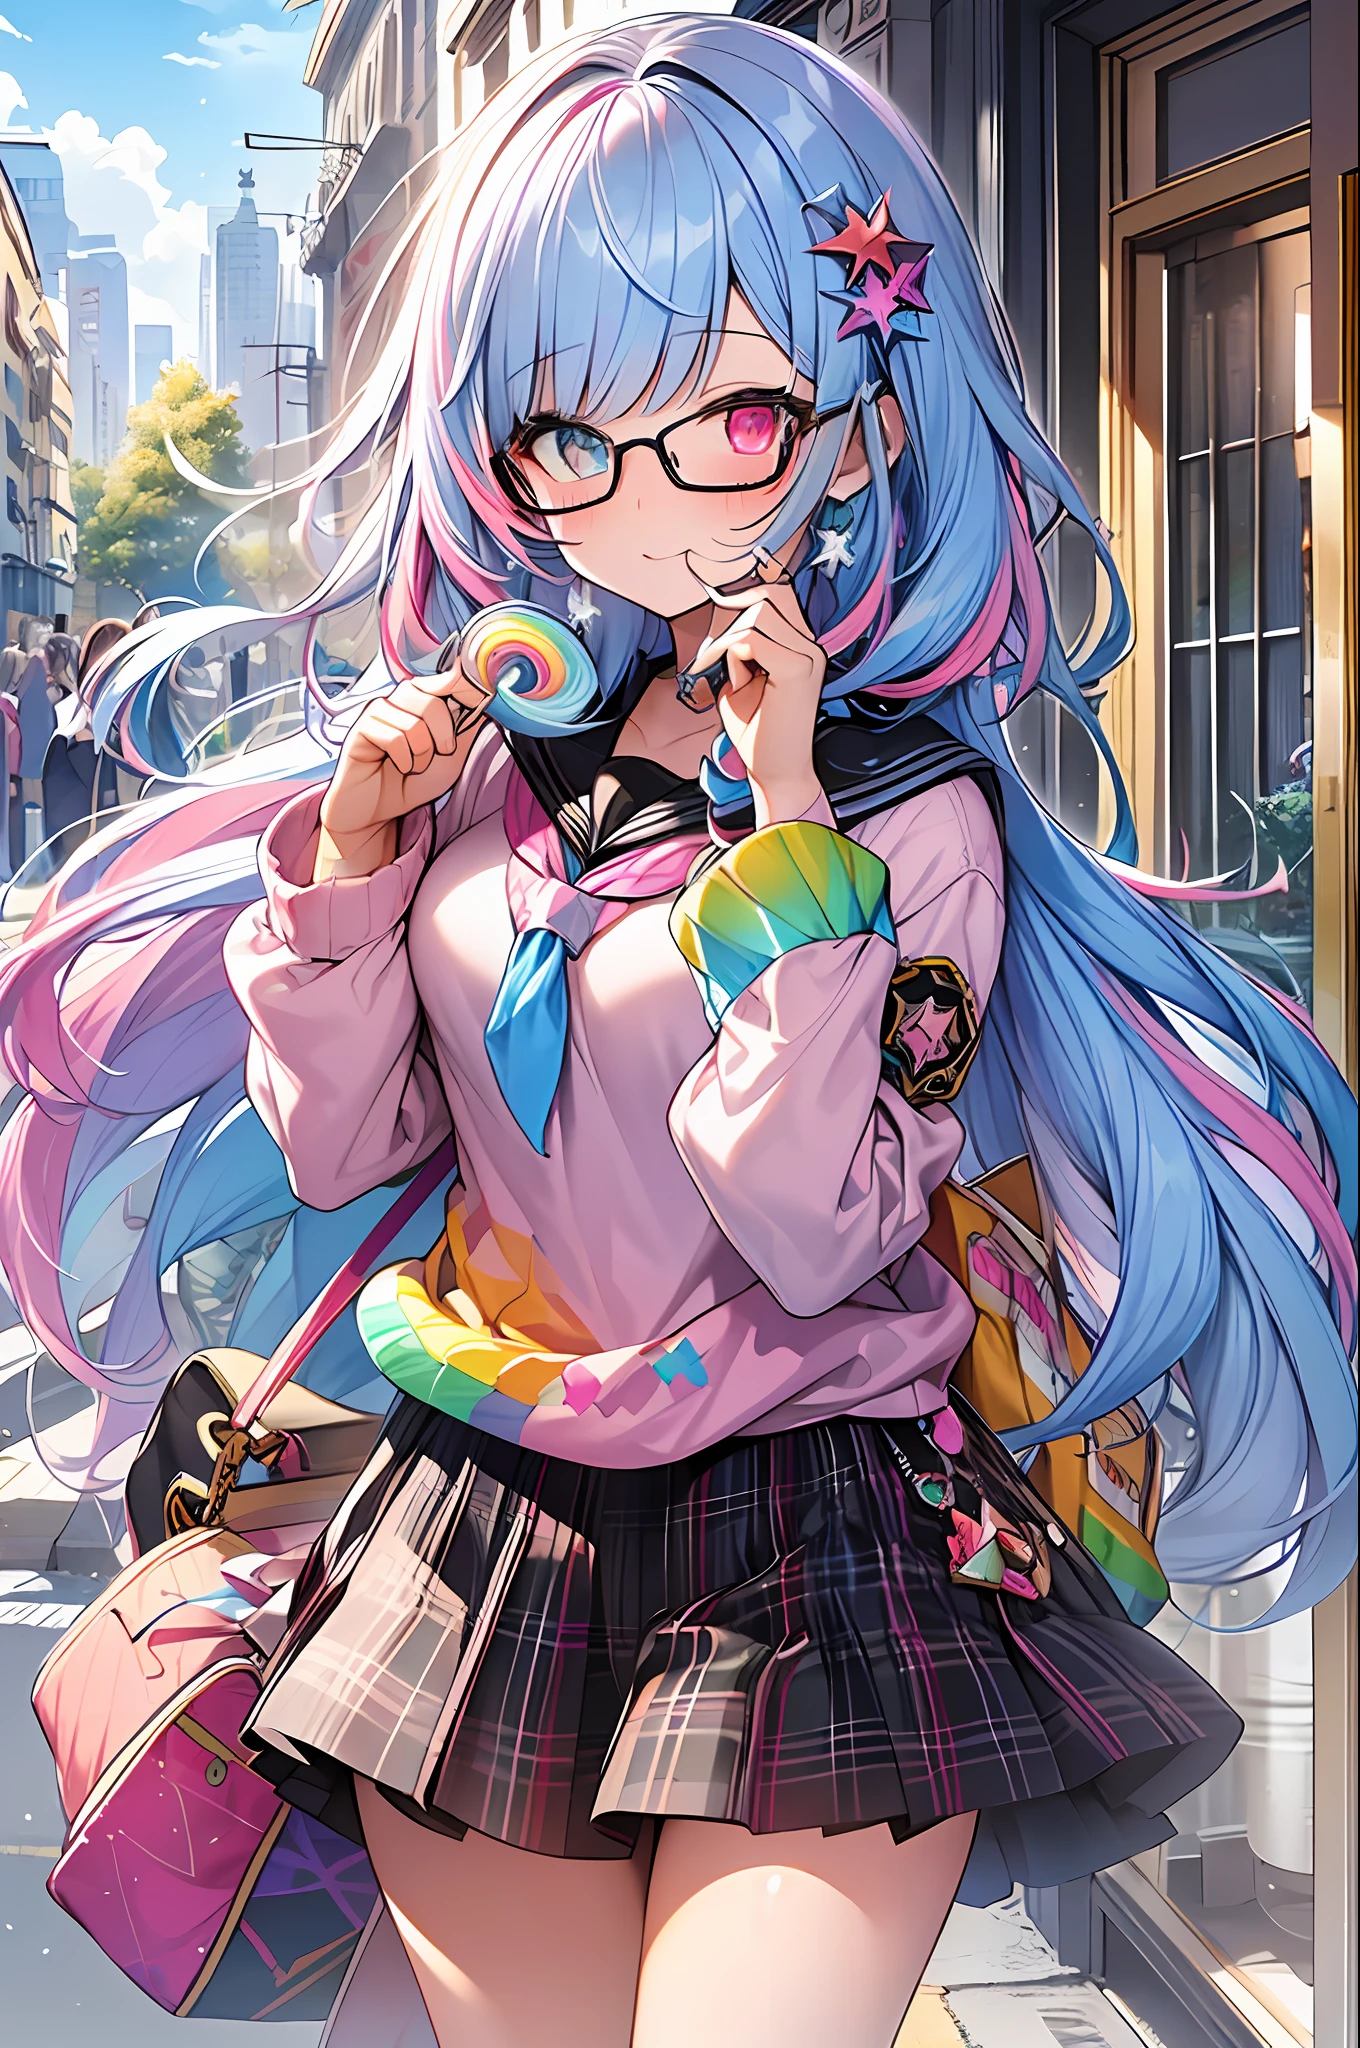 (masterpiece, highest quality, highest quality, watercolor art (pendant), official art, beautiful and aesthetic, (1.2), (1 girl: 1.3), (fractal art: 1.3), full body, star-shaped pupil, , pattern, ((iridescent hair, colorful hair, half blue and half pink hair: 1.2)), (school uniform), colorful, glasses, writing, heterochromia, (colorful: 1.5), ((rainbow sky)), sun, (embarrassed face)